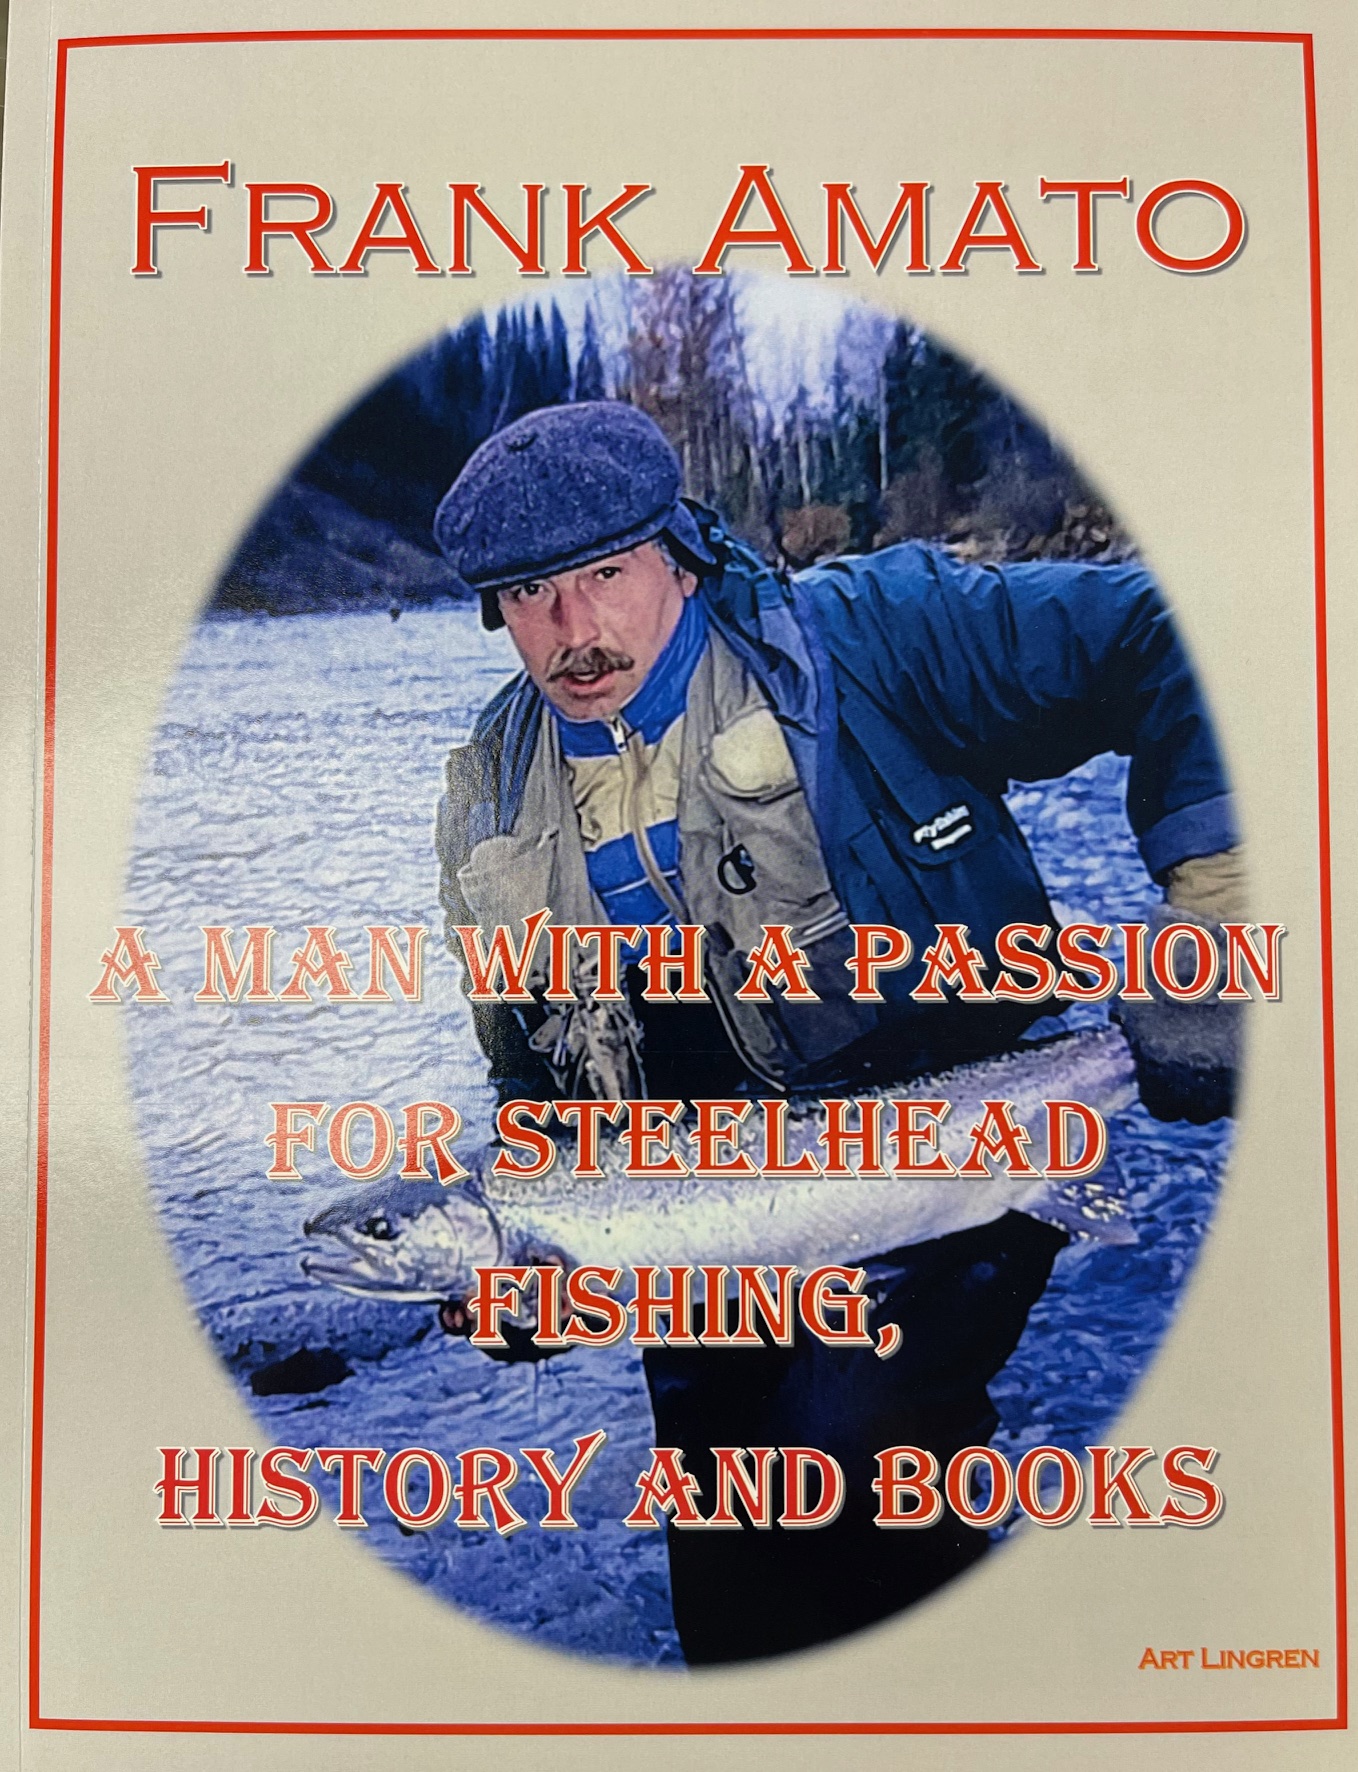 Frank Amato - A Man With A Passion For Steelhead Fishing, History And Books, By Art Lingren